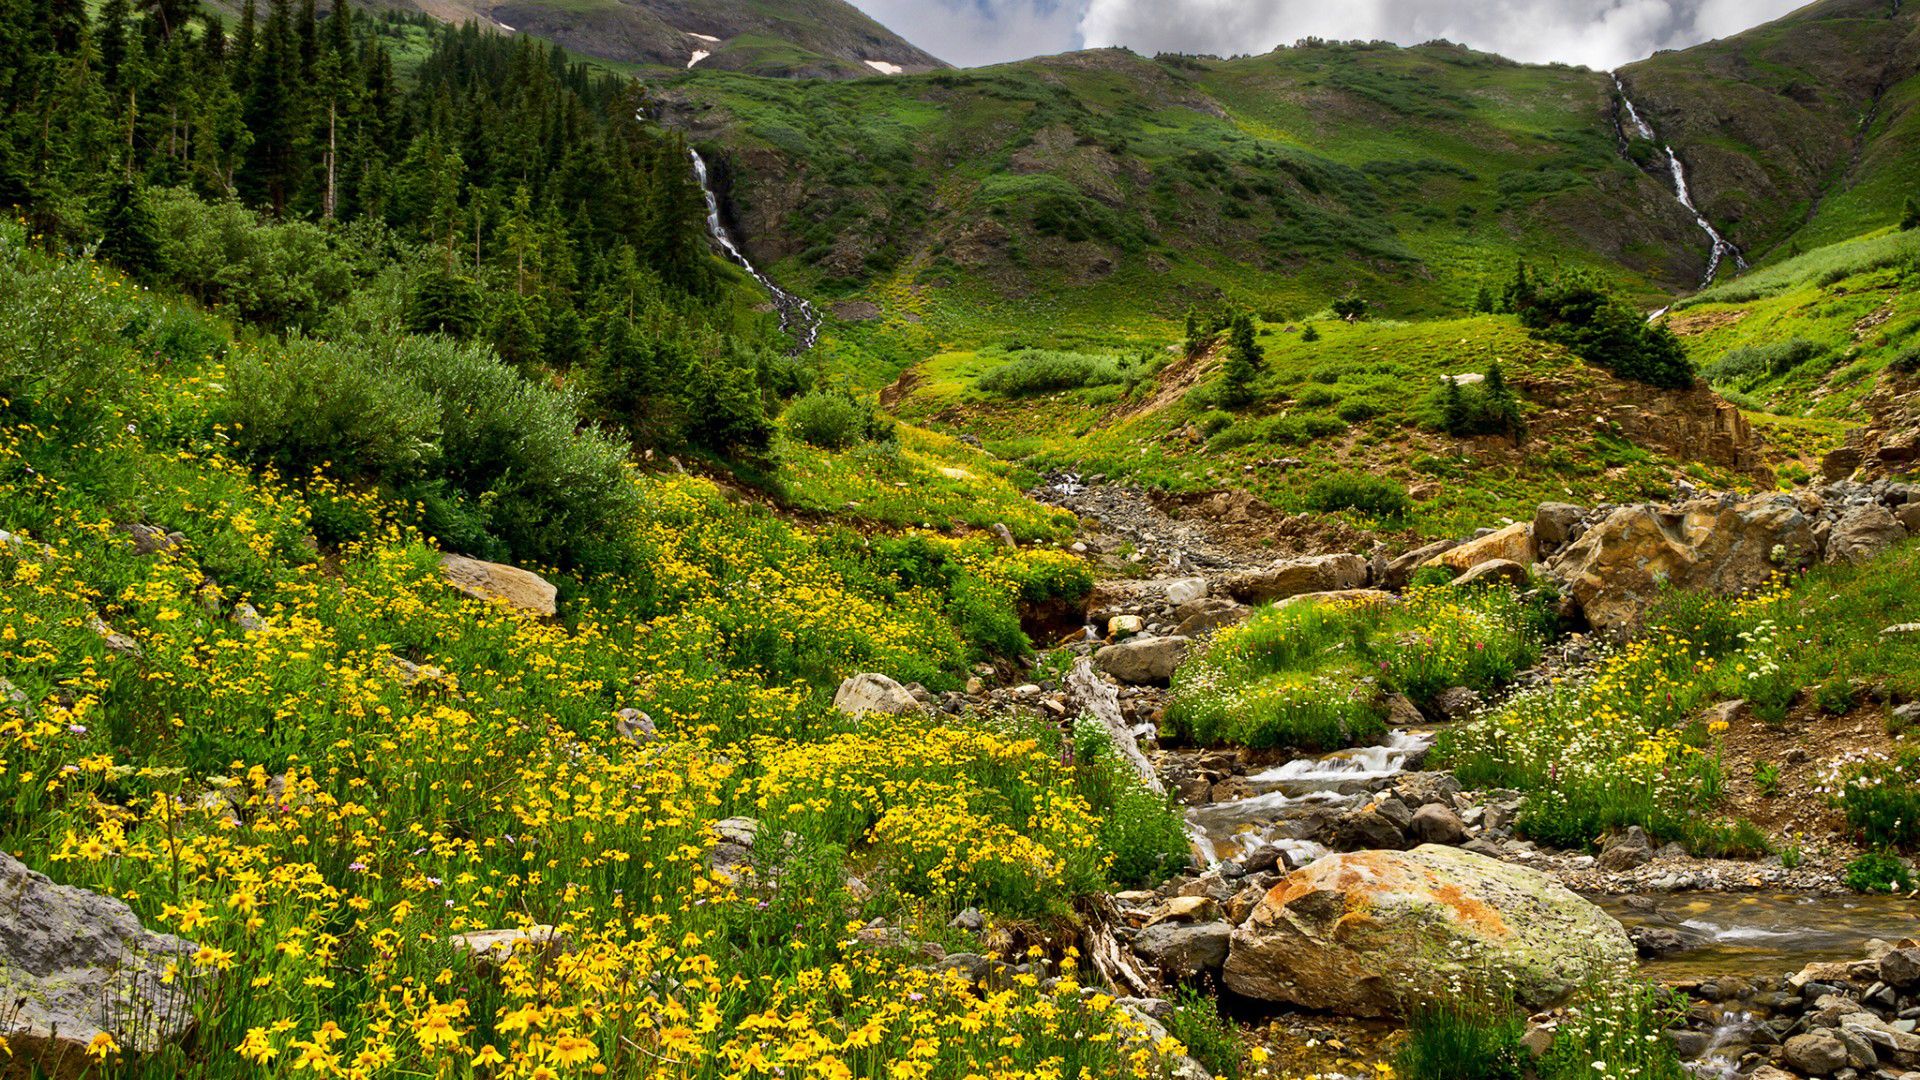 1920x1080 Yellow Mountain Flowers Wallpaper High Quality Image And Transparent Png Free Clipart